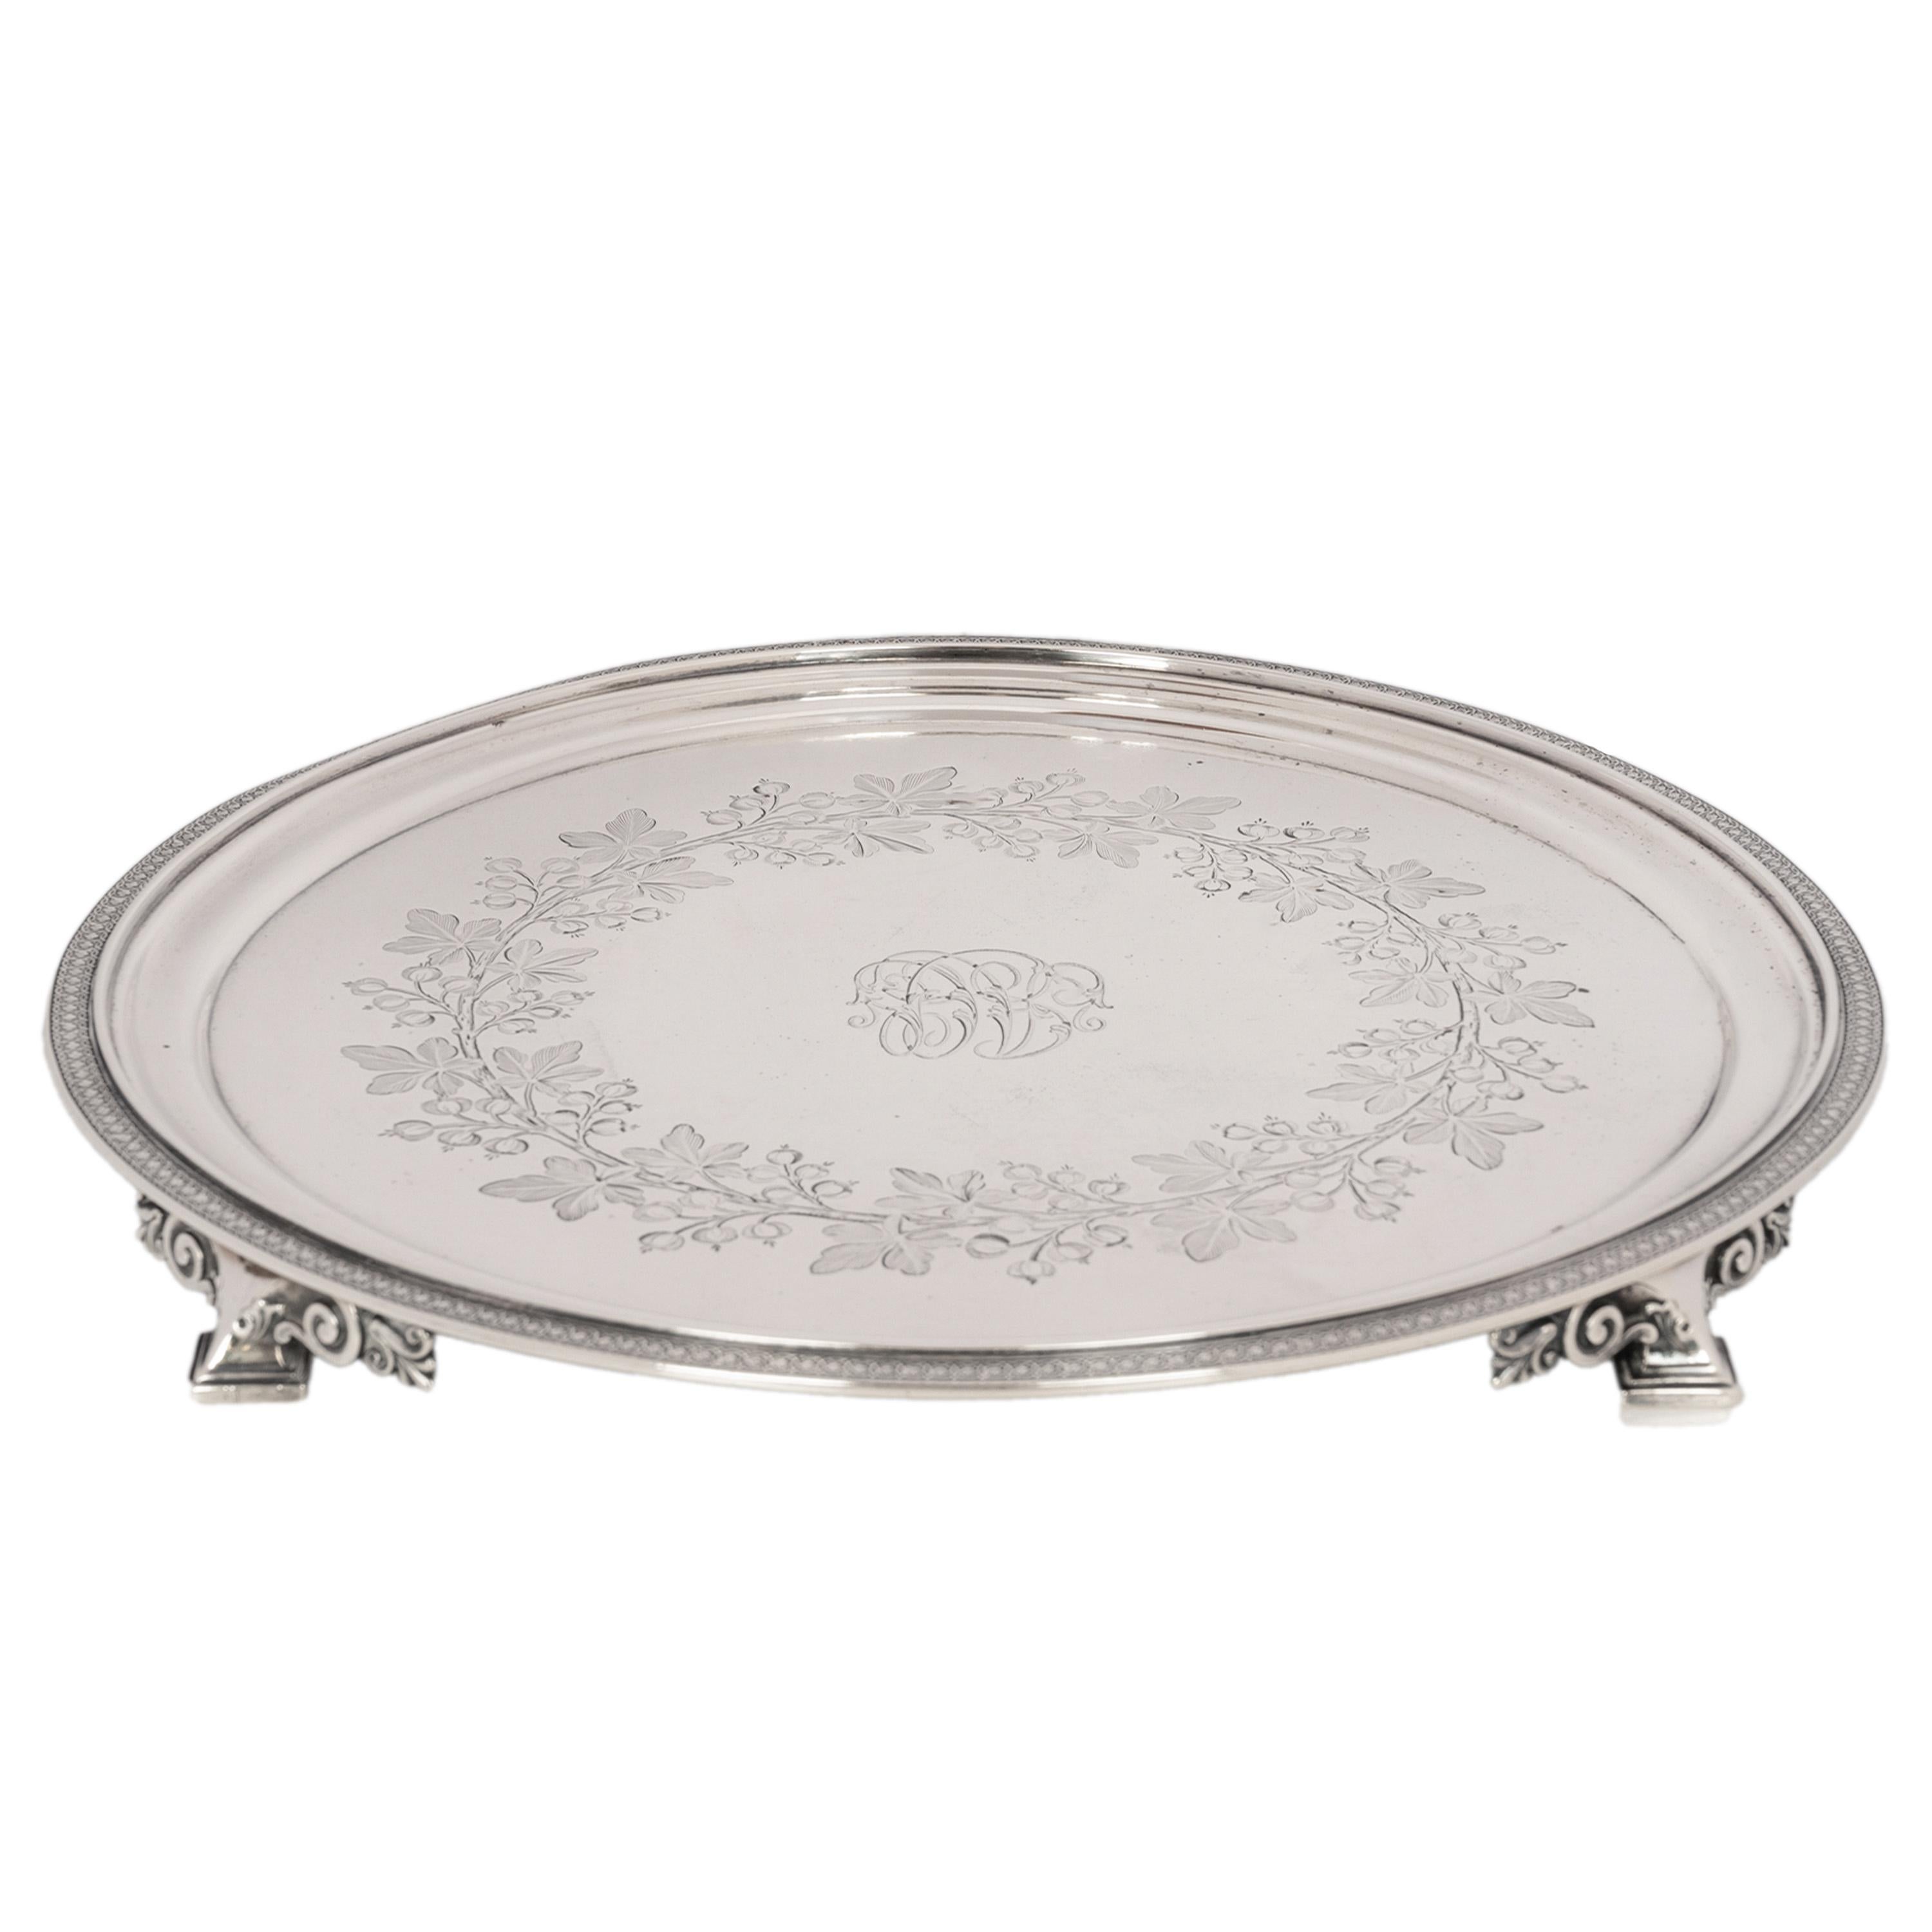 Antique Engraved Sterling Silver Tiffany & Co Footed Salver Tray New York 1870 For Sale 5